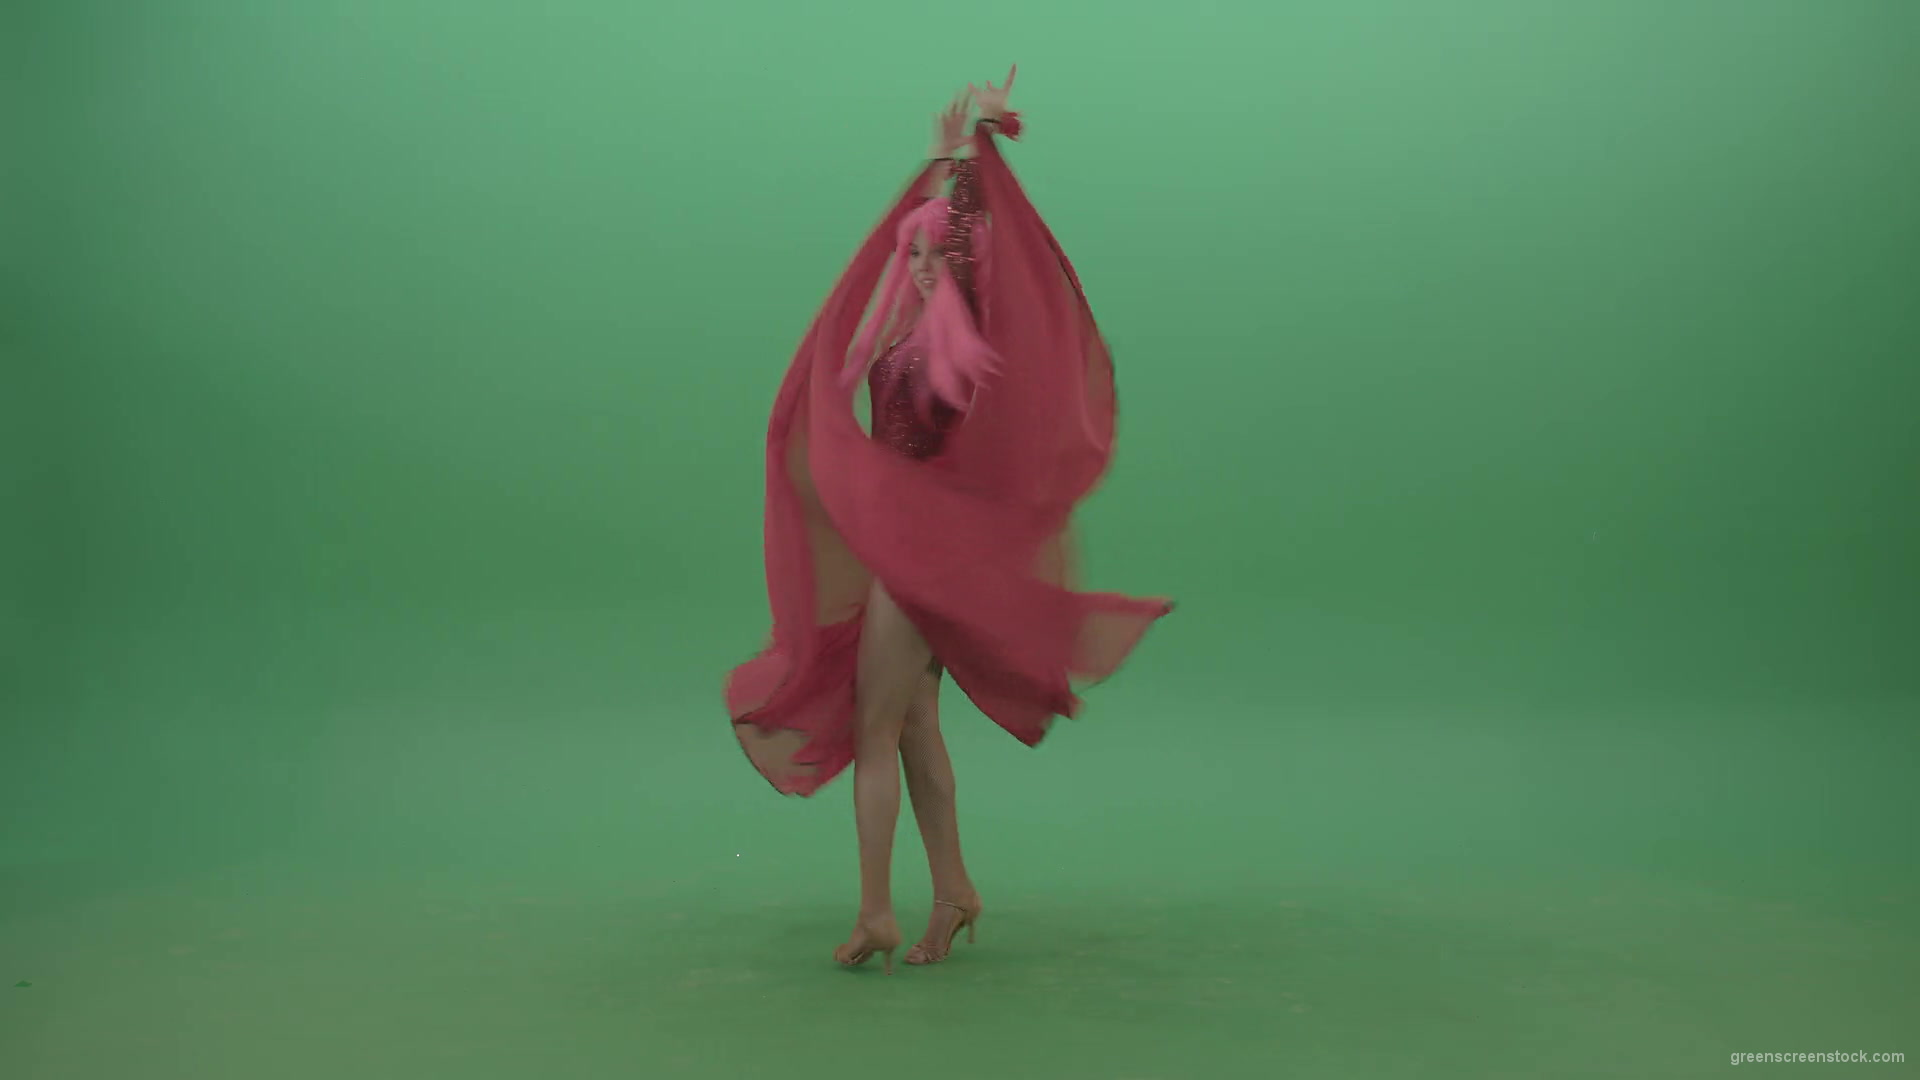 Beautiful-girl-in-red-dress-and-pink-hair-dancing-flamenco-and-spinning-on-green-screen-4K-Video-Footage-1920_007 Green Screen Stock